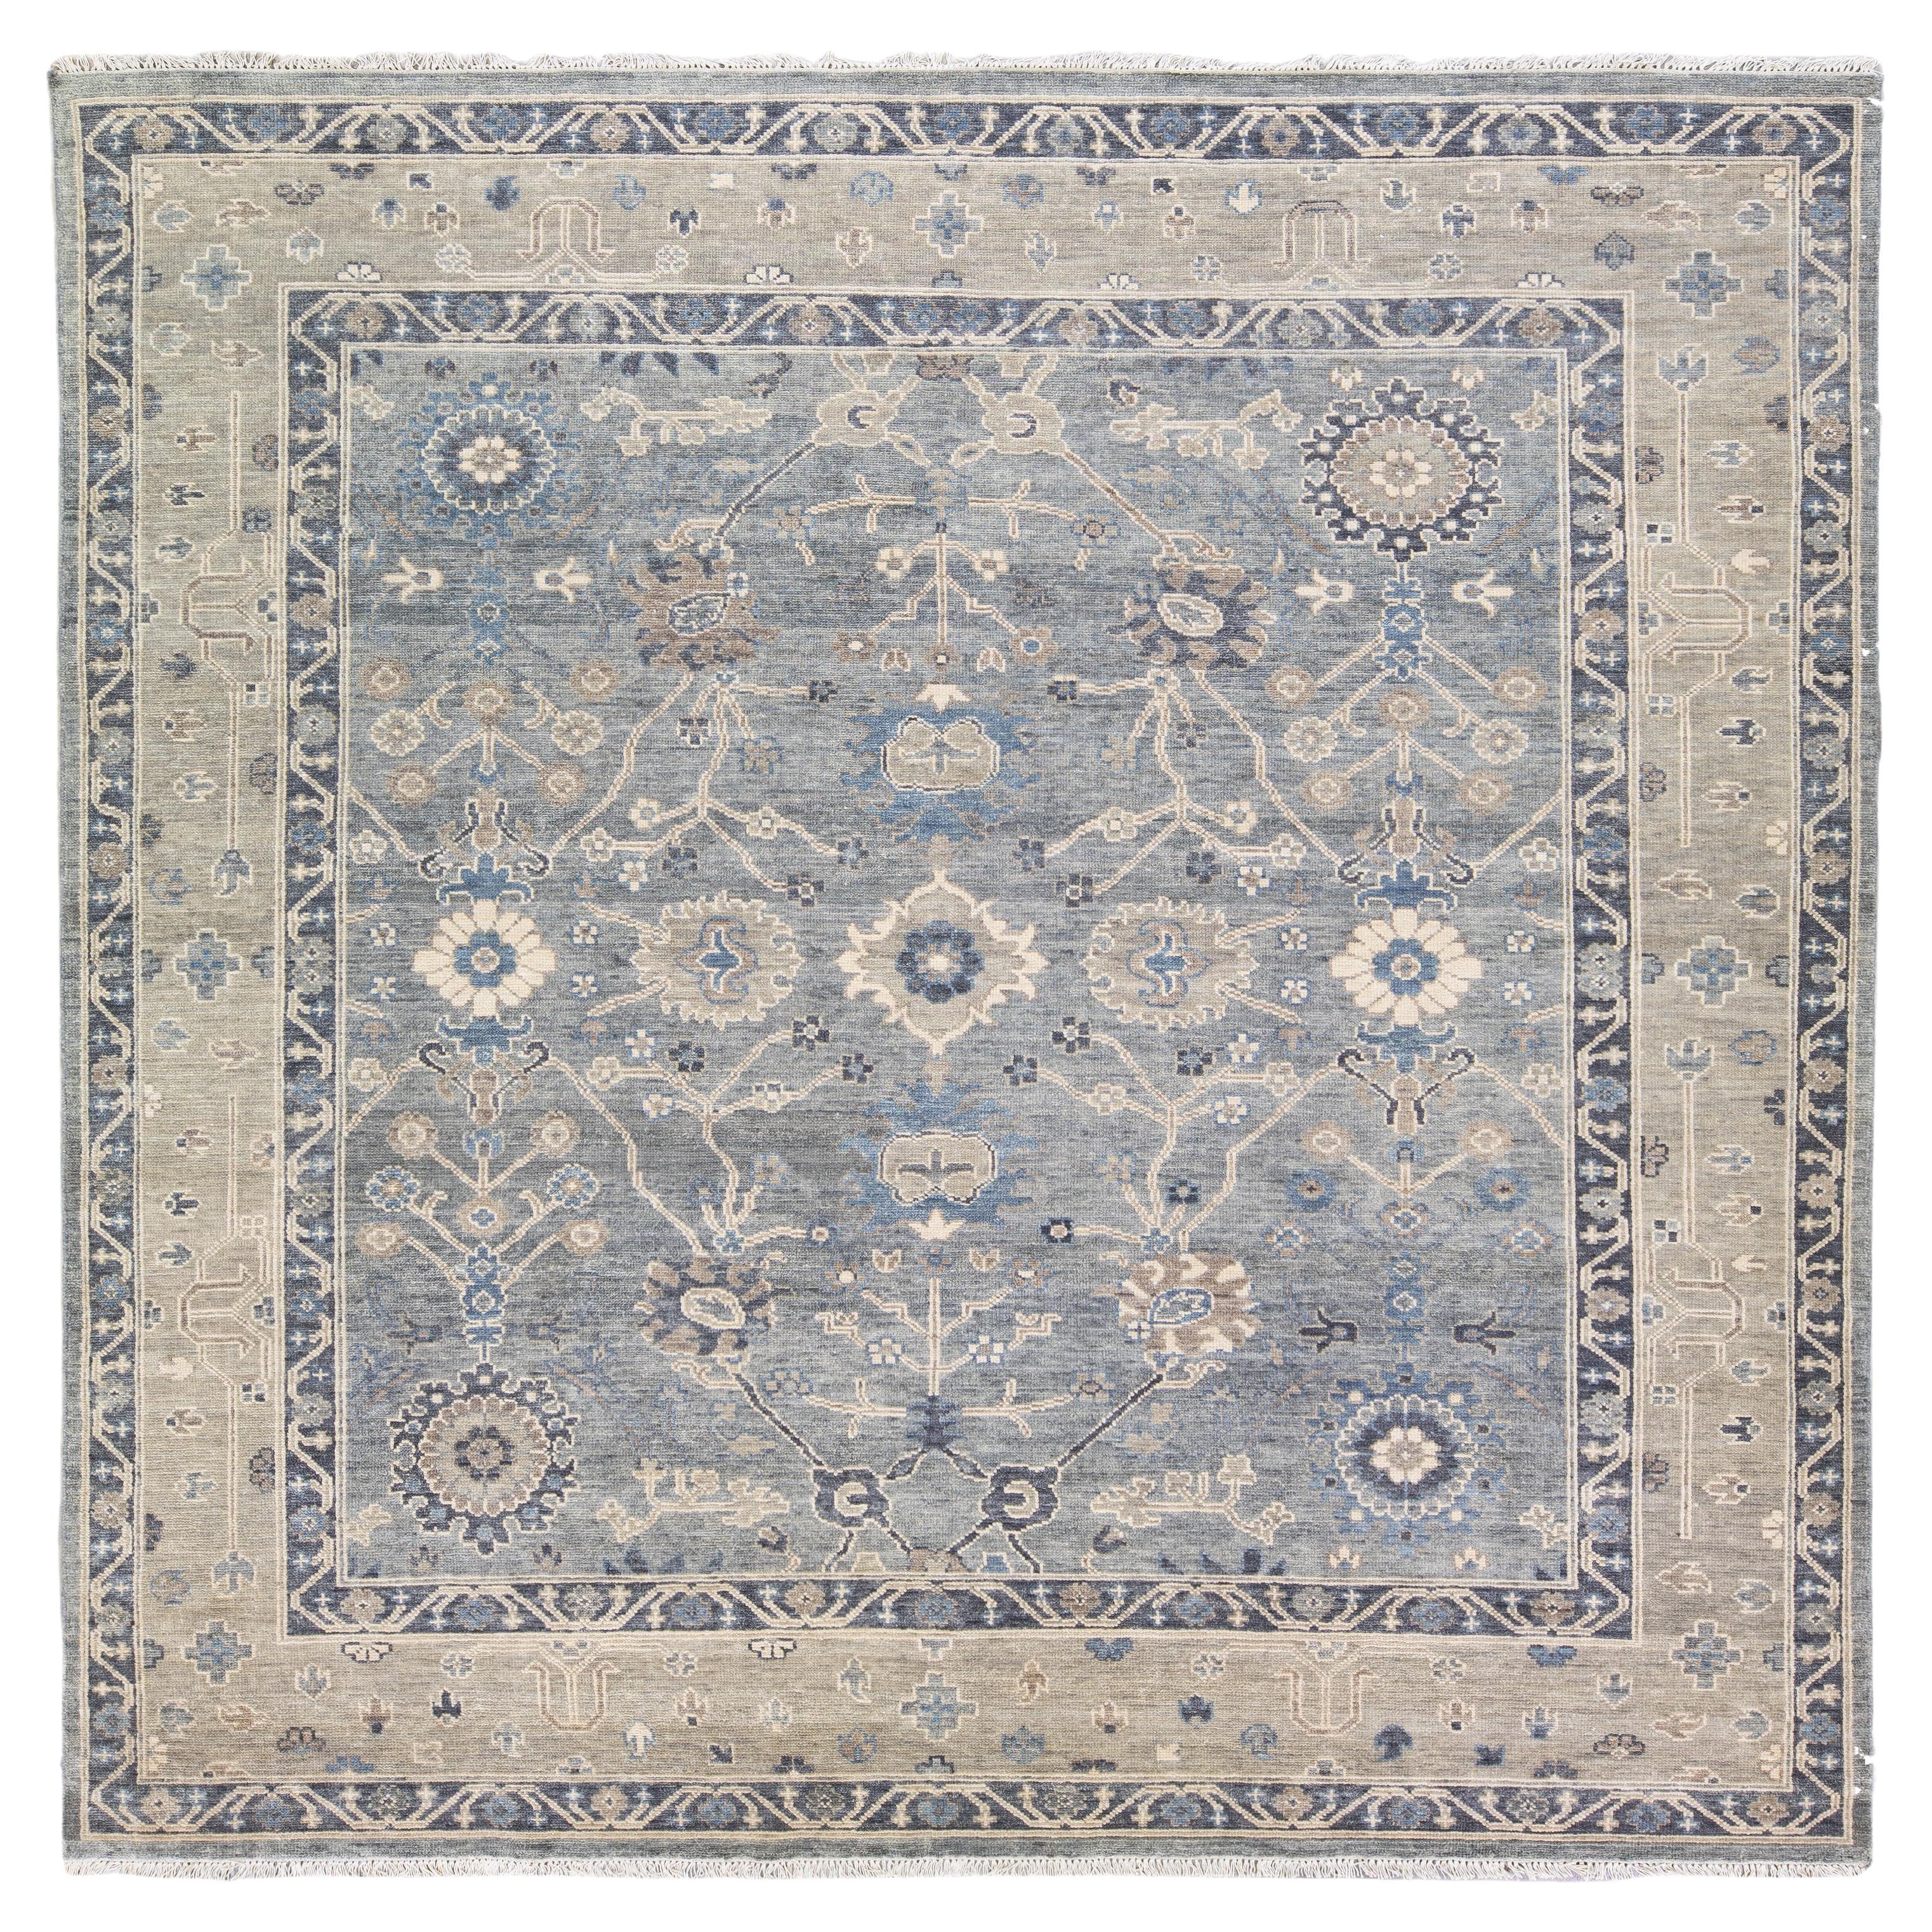 Modern Gray and Tan Oushak Style Handmade Floral Motif Square Wool Rug